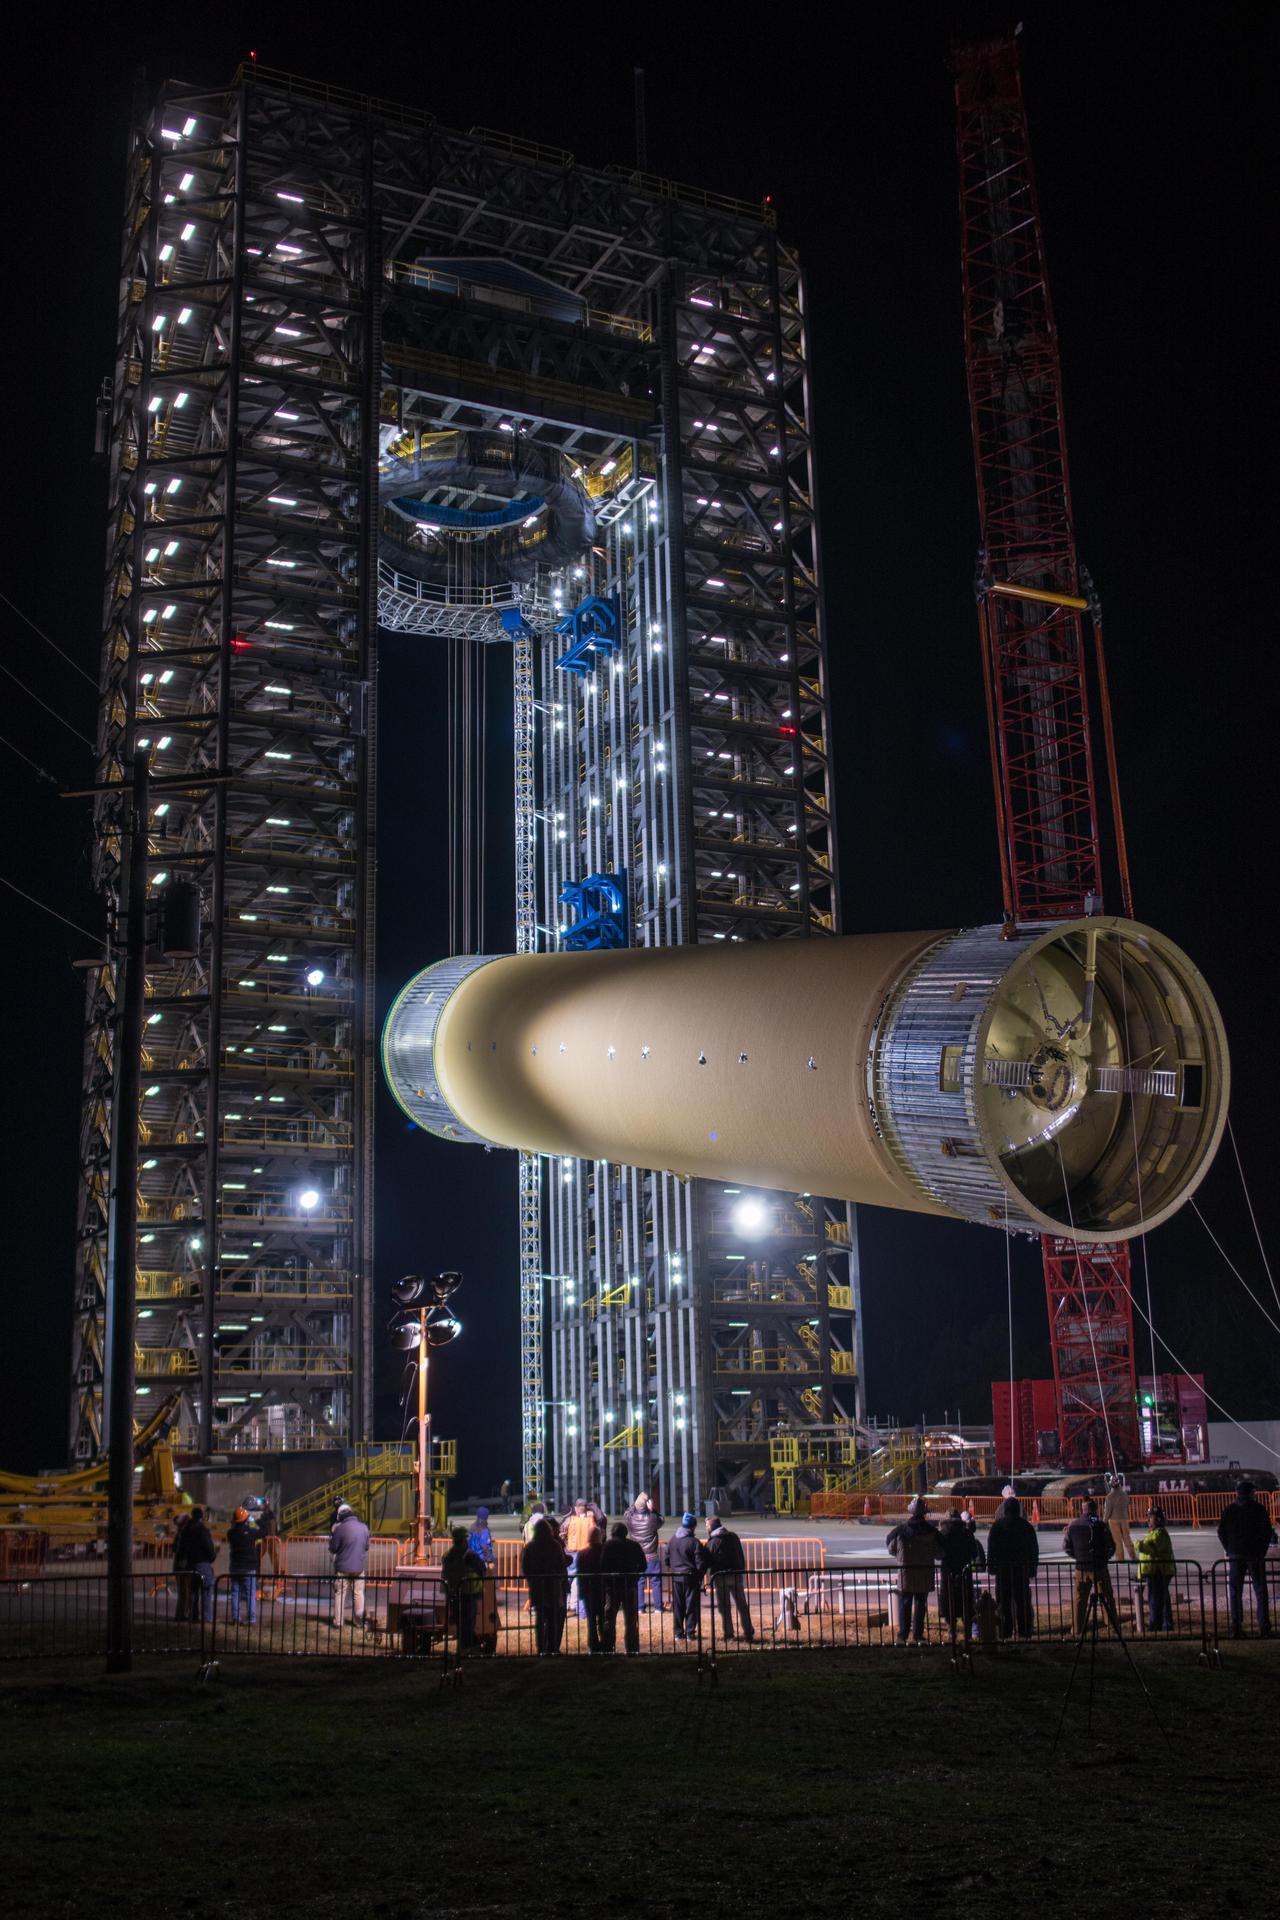 Space Launch System Liquid Hydrogen Tank Test Article Positioned in Test Stand at NASA’s Marshall Space Flight Center